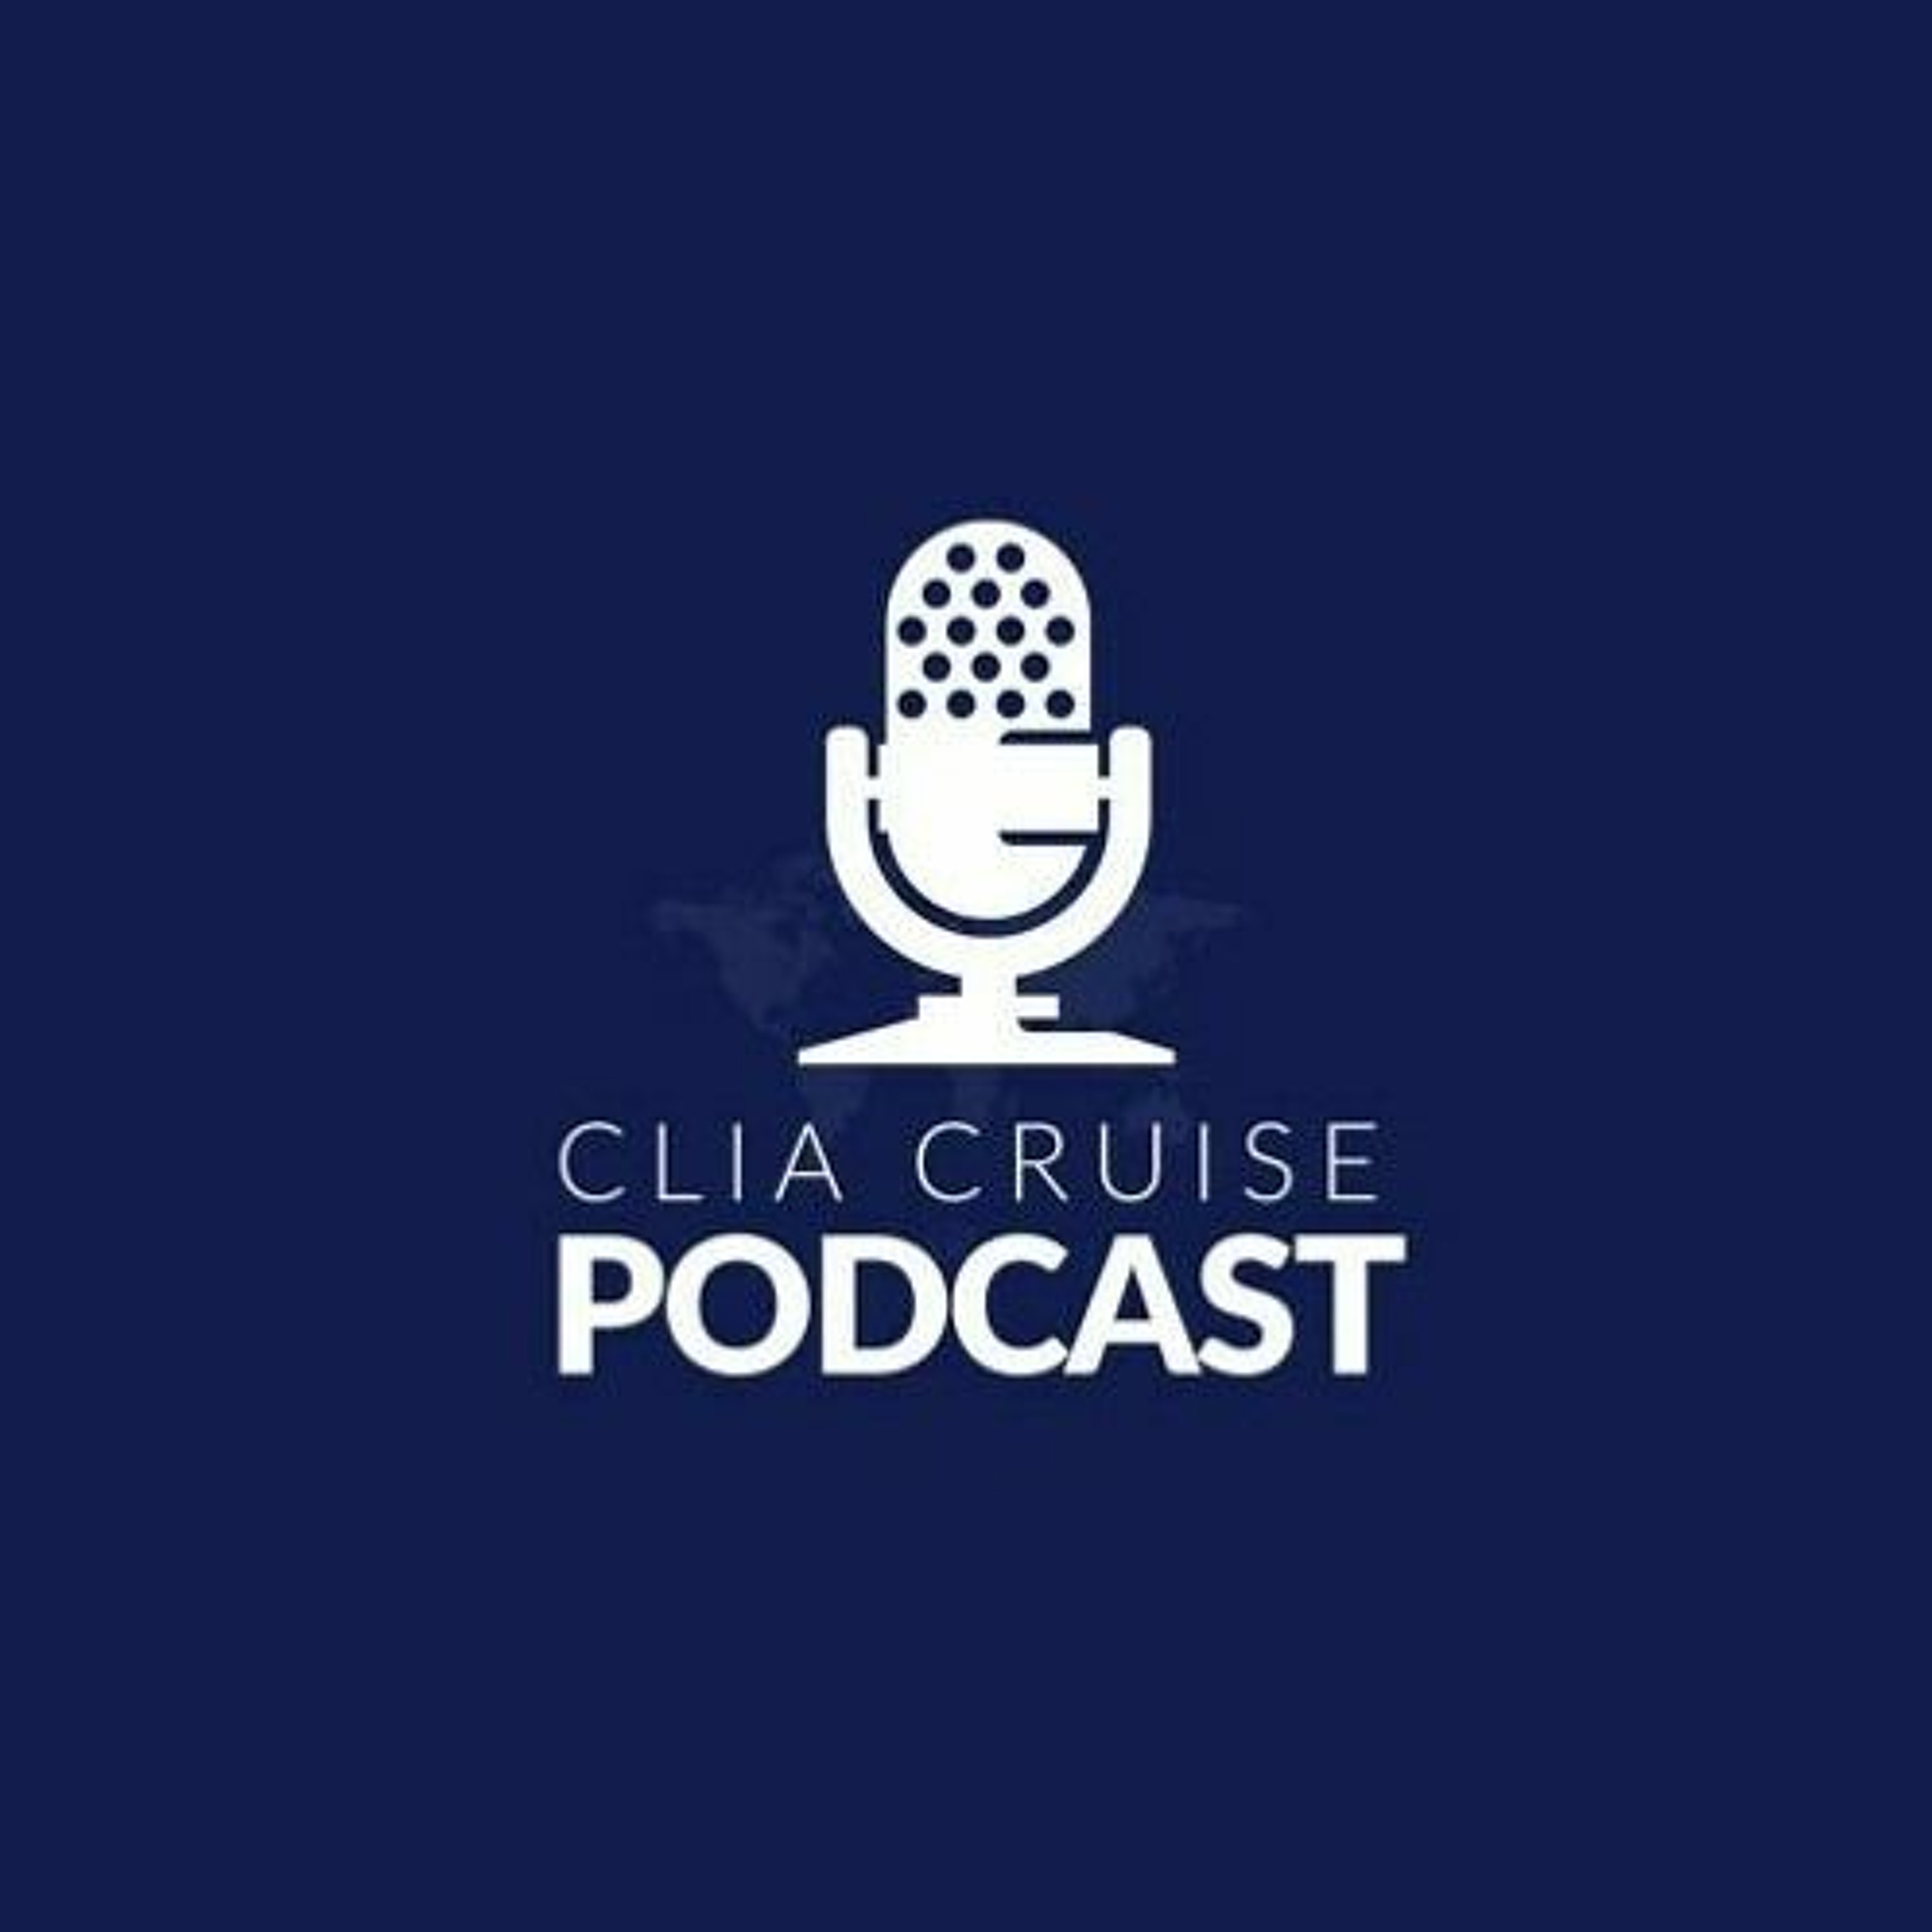 Episode 119 - Andy Harmer talks with Luke Smith from Carnival Cruise Line